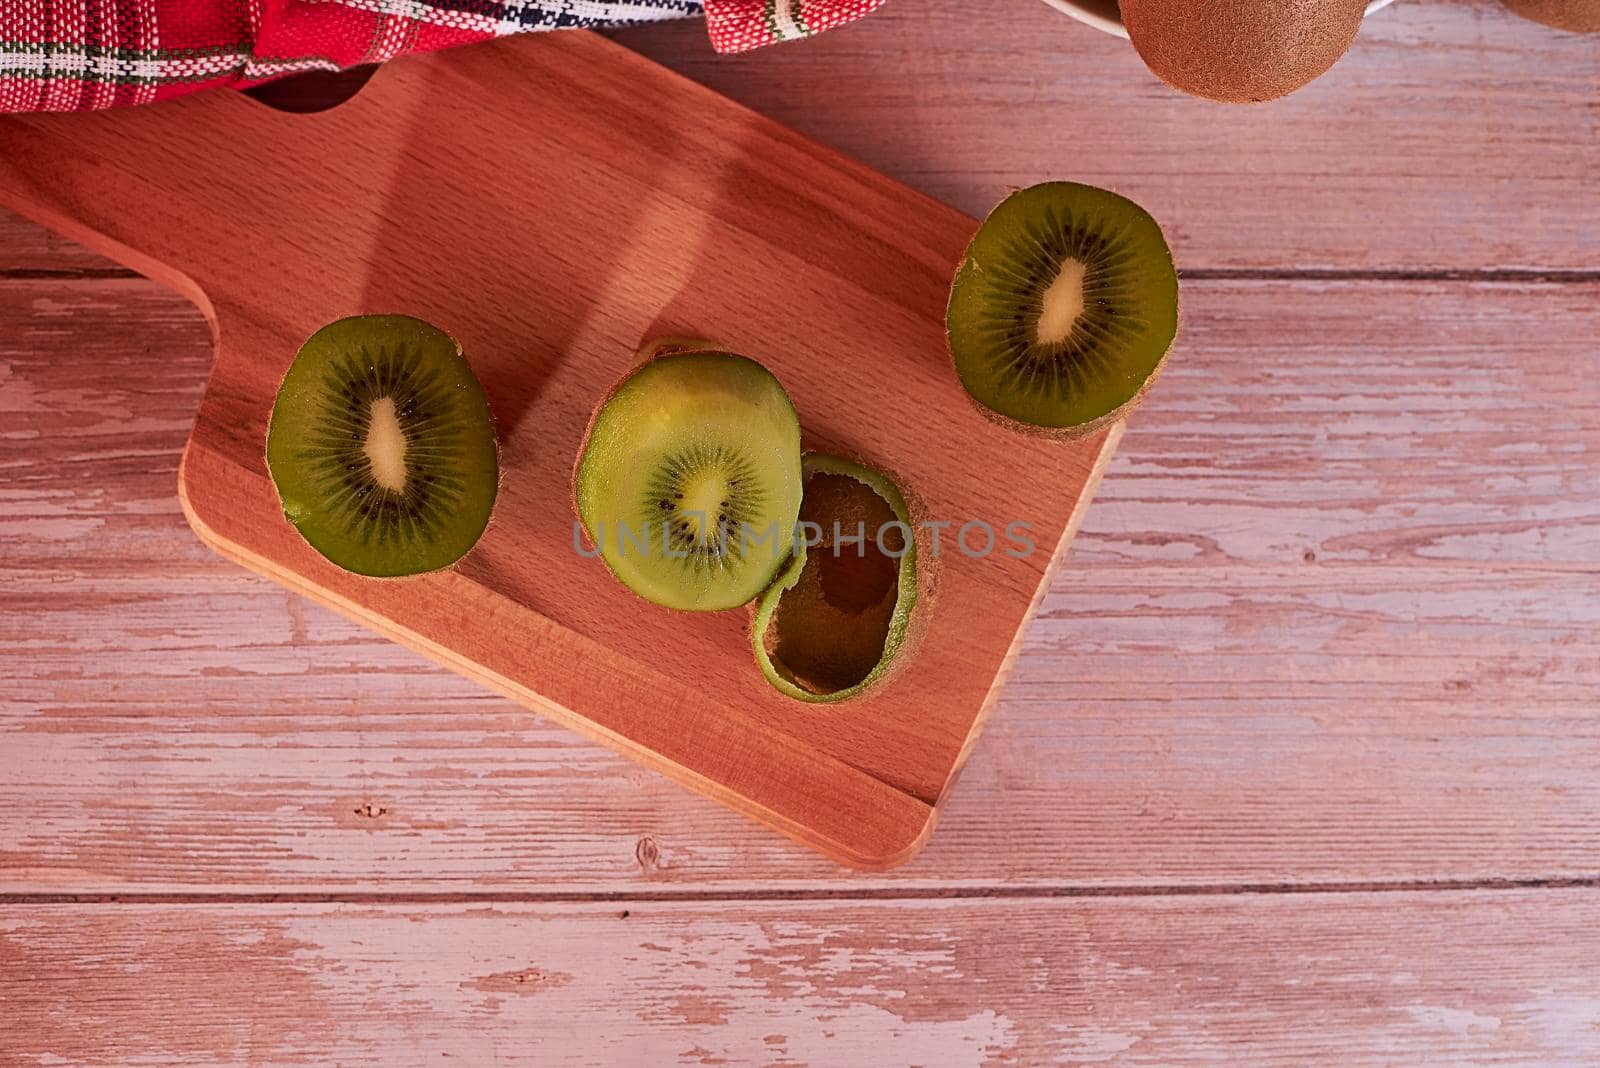 Cut kiwis on wooden board. wooden floor, zenithal view, red and white cloth, empty space.